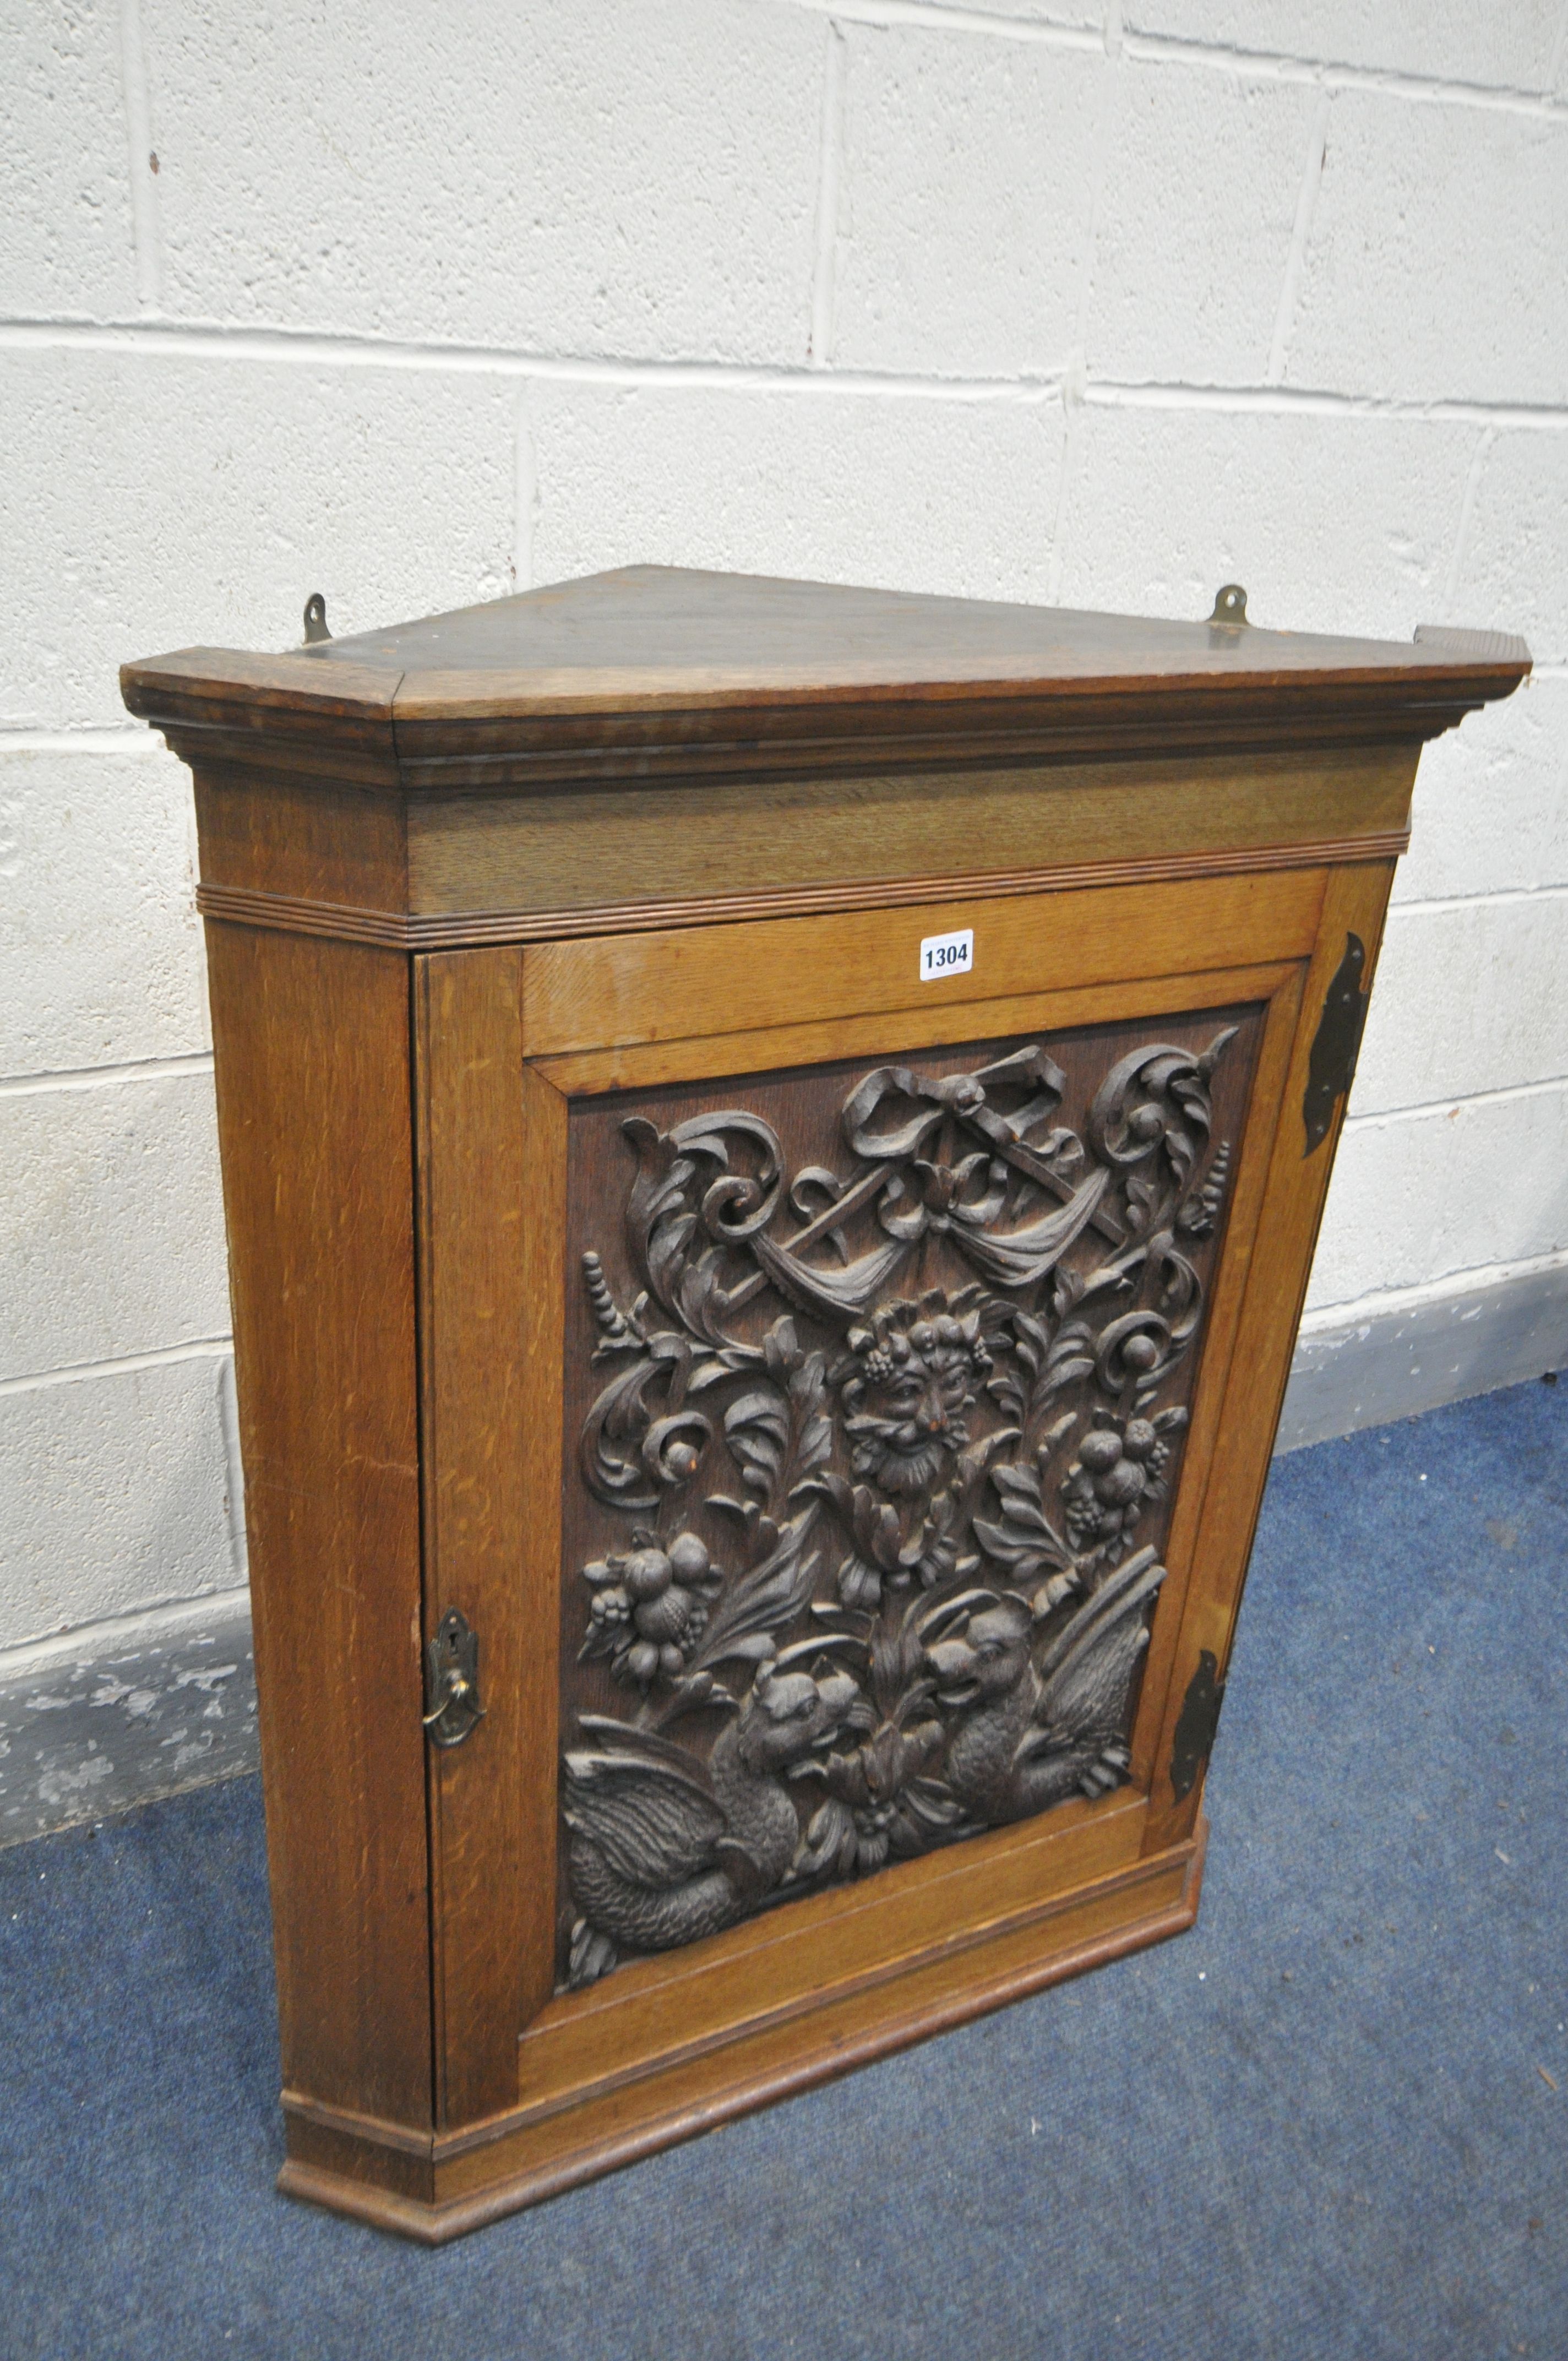 A 20TH CENTURY OAK HANDING CORNER CUPBOARD, with a heavily carved foliate panel, a depicting a - Image 2 of 4